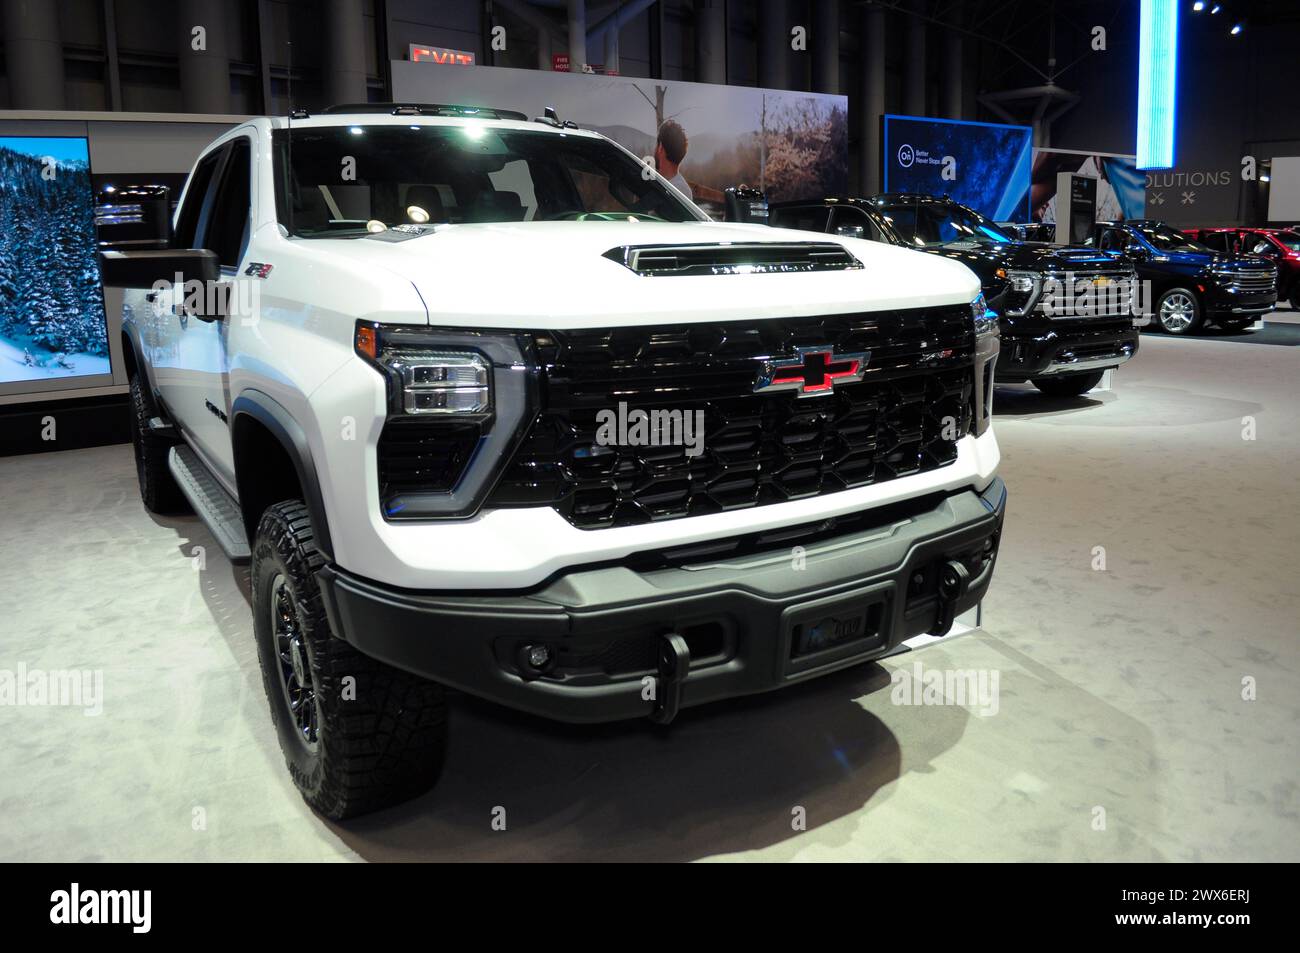 New York, United States. 27th Mar, 2024. A 2024 Chevrolet Silverado HD ZR2 Bison vehicle is seen on the first media day at the 2024 New York International Auto Show in the Jacob K. Javits Convention Center. The annual NYIAS in Manhattan, New York City featured various car companies, debuts of new vehicles and automobile industry professionals. The show which opens to the public on March 29 and ends on April 7, attracts thousands of car enthusiasts. The NYIAS began in 1900 showcasing automobiles and examples of future car technology. Credit: SOPA Images Limited/Alamy Live News Stock Photo